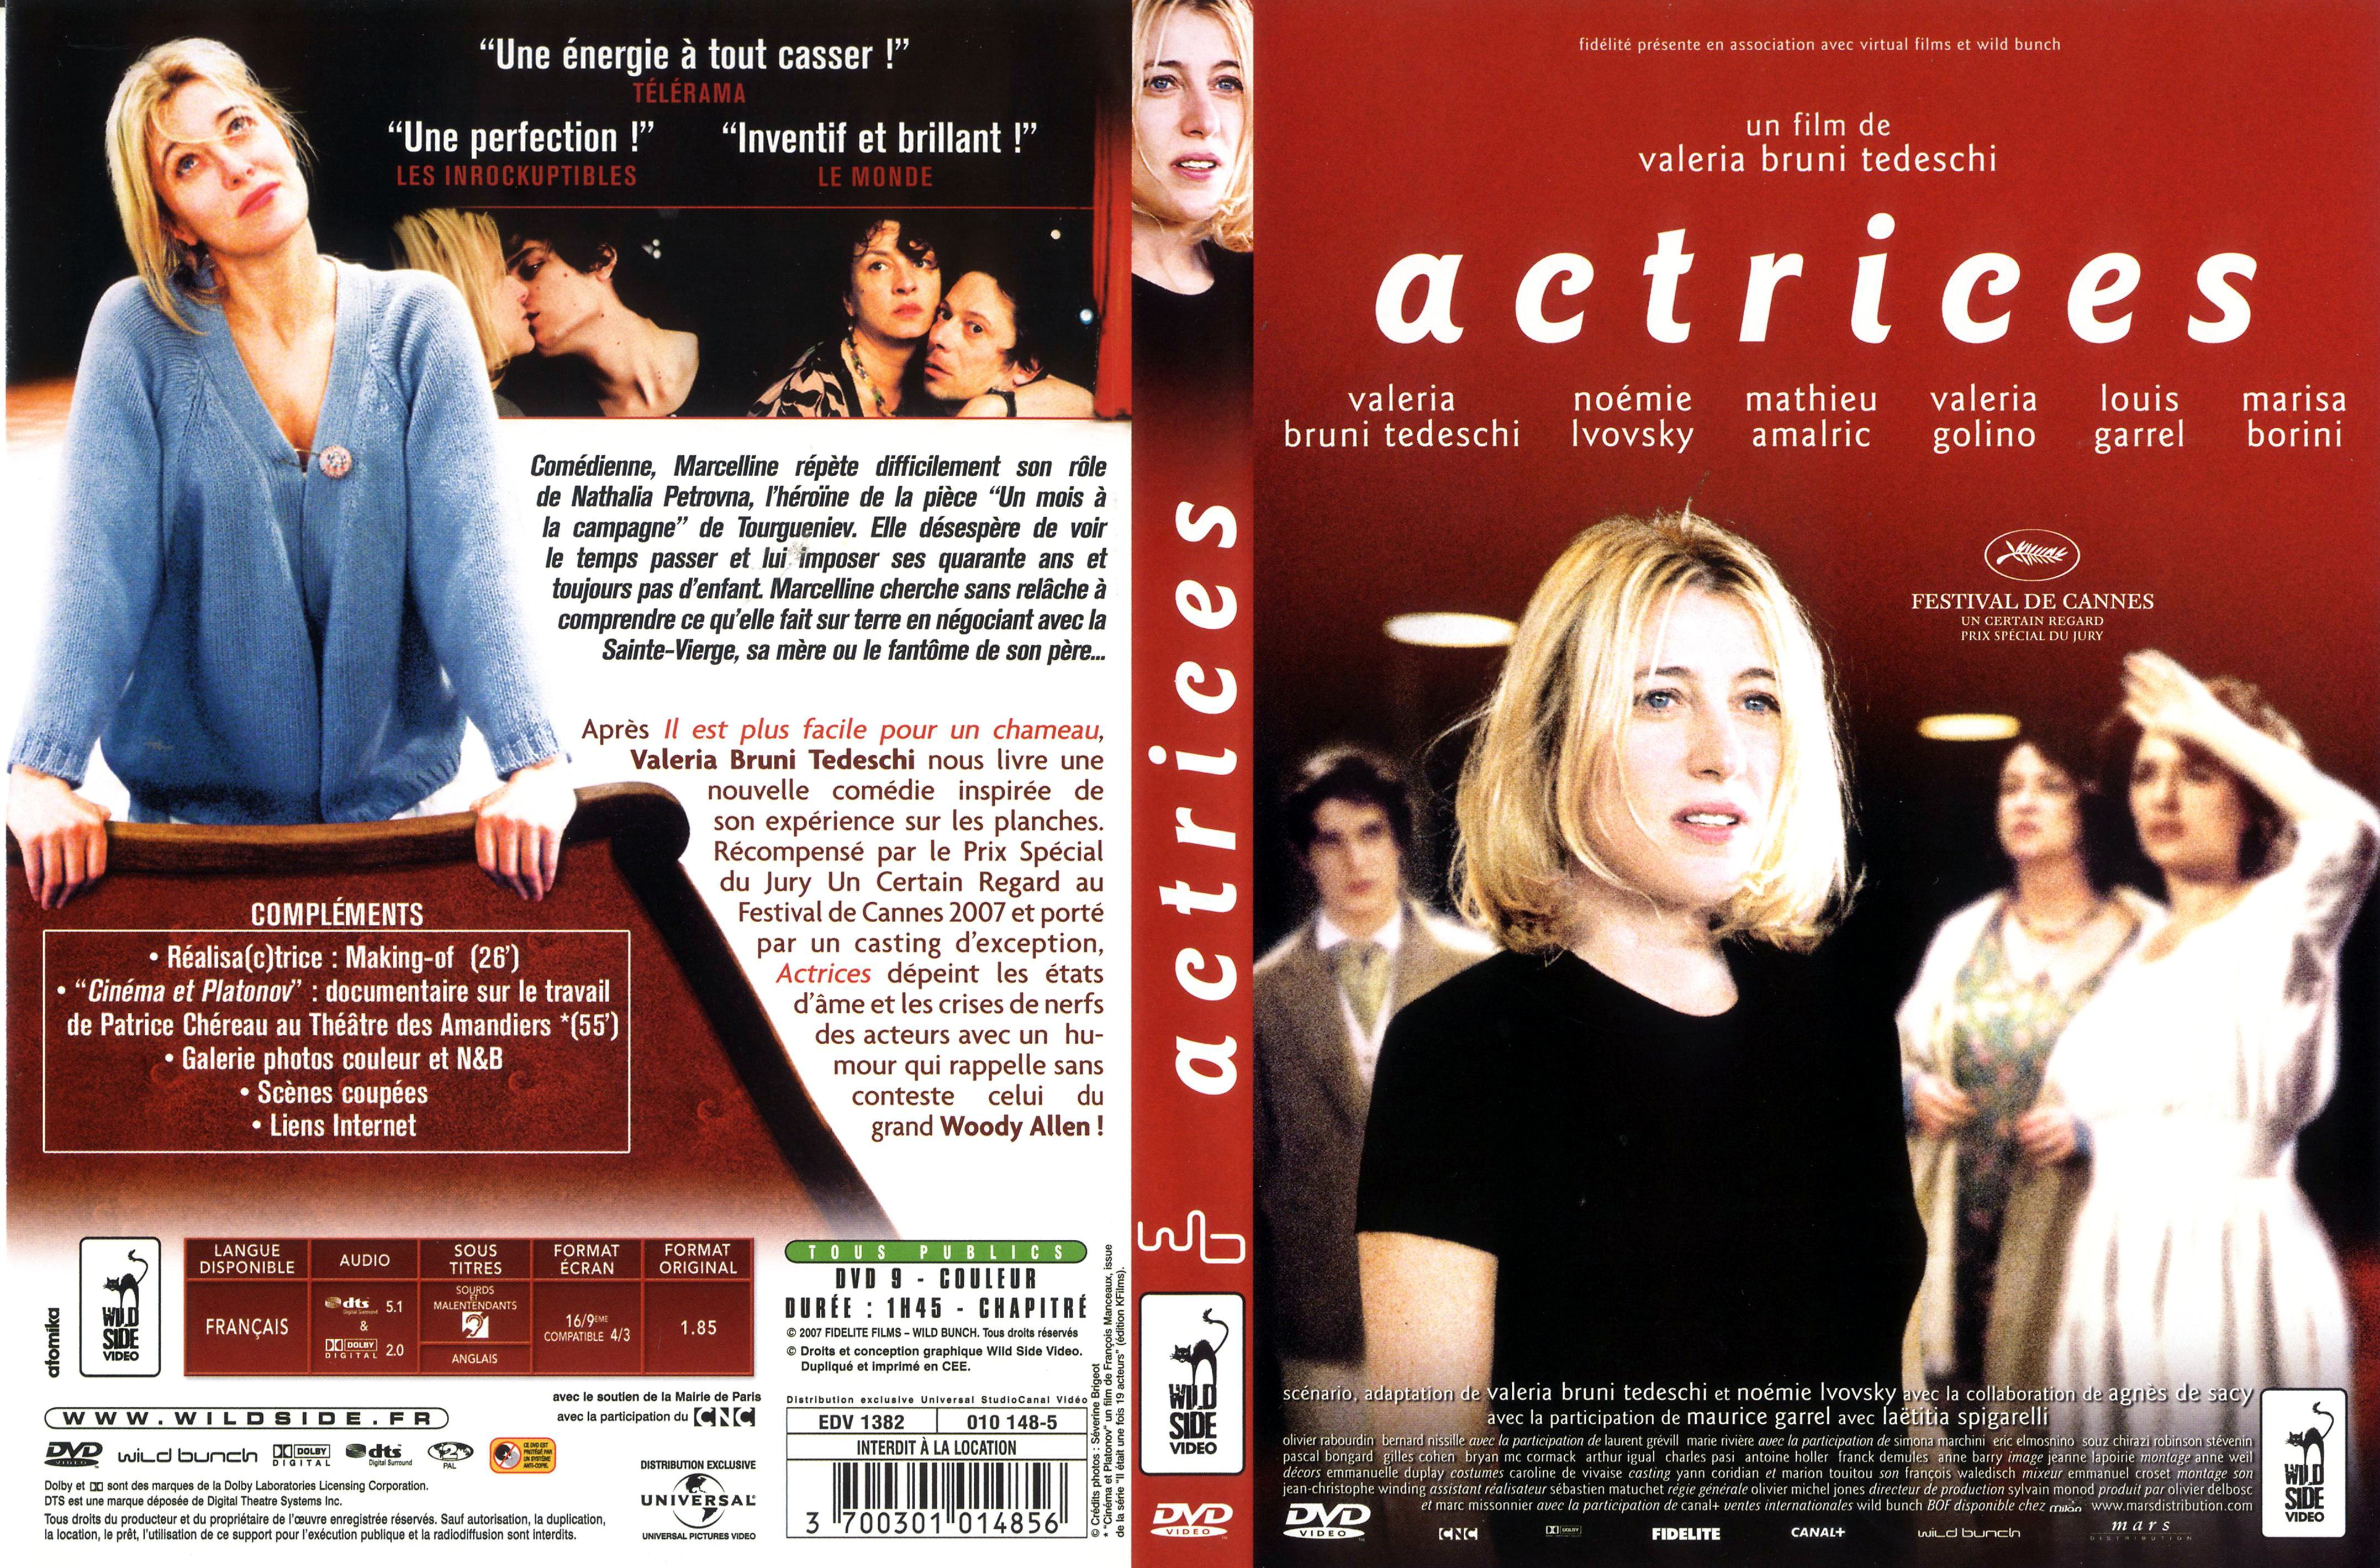 Jaquette DVD Actrices